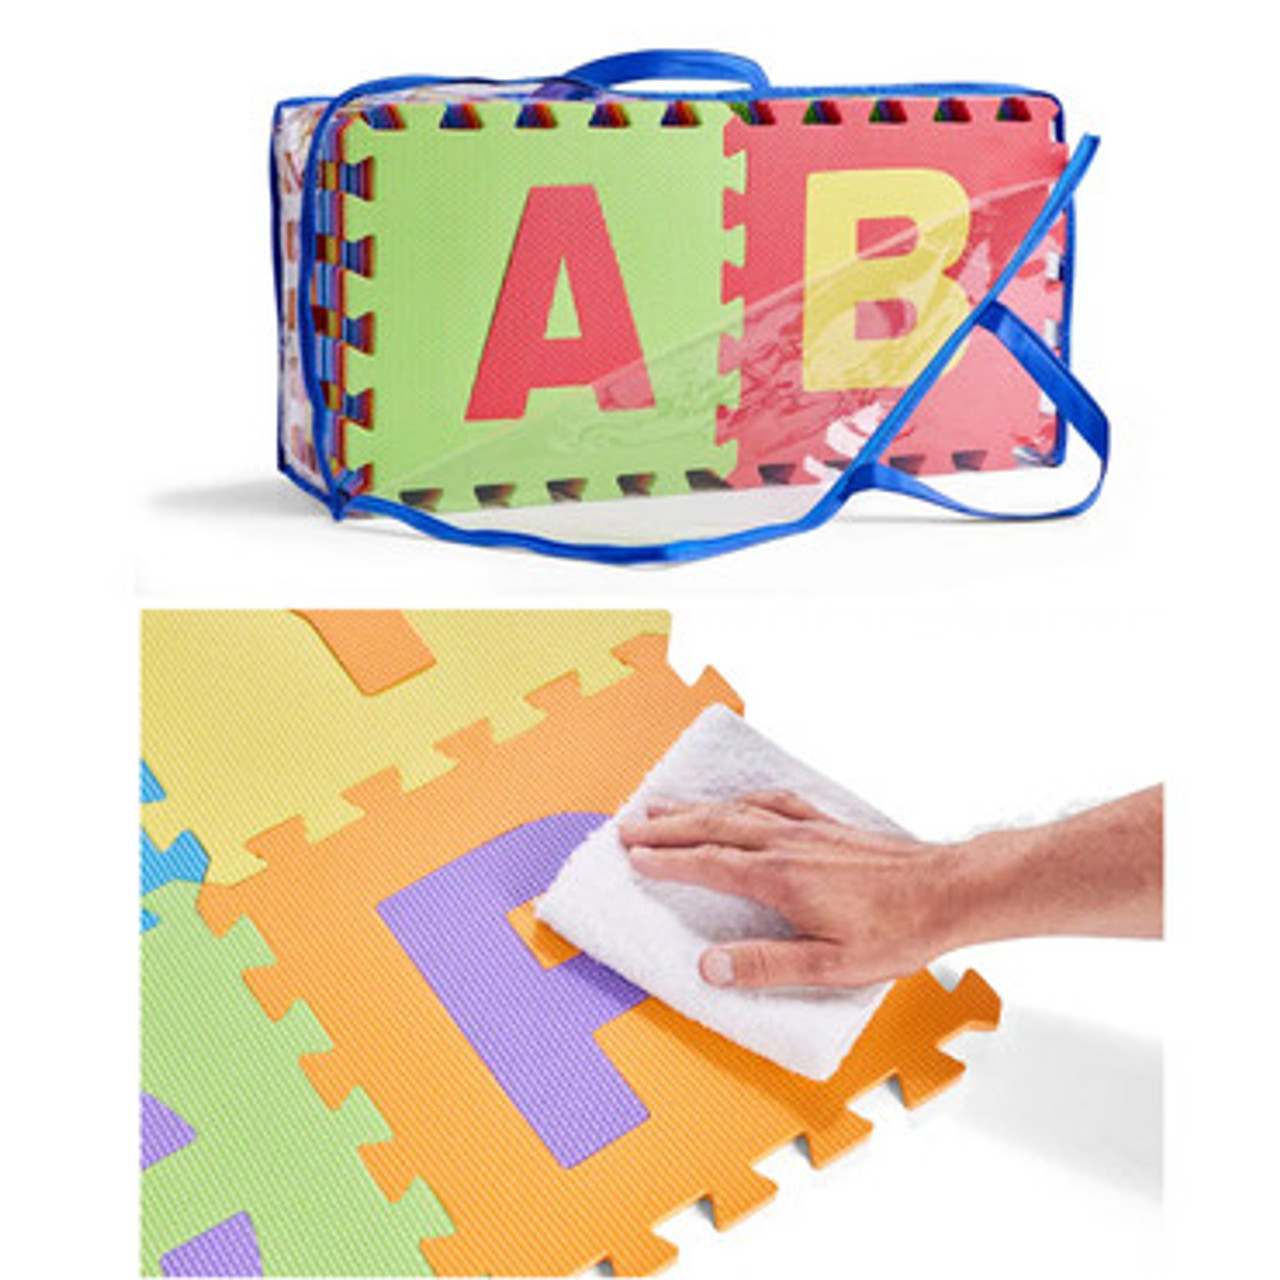 https://cdn11.bigcommerce.com/s-pqt7n8/images/stencil/1280x1280/products/12625/36260/epoch-kidoozie-puzzle-playmat3__34814.1690919638.370.500__86719.1696451179.jpg?c=2?imbypass=on